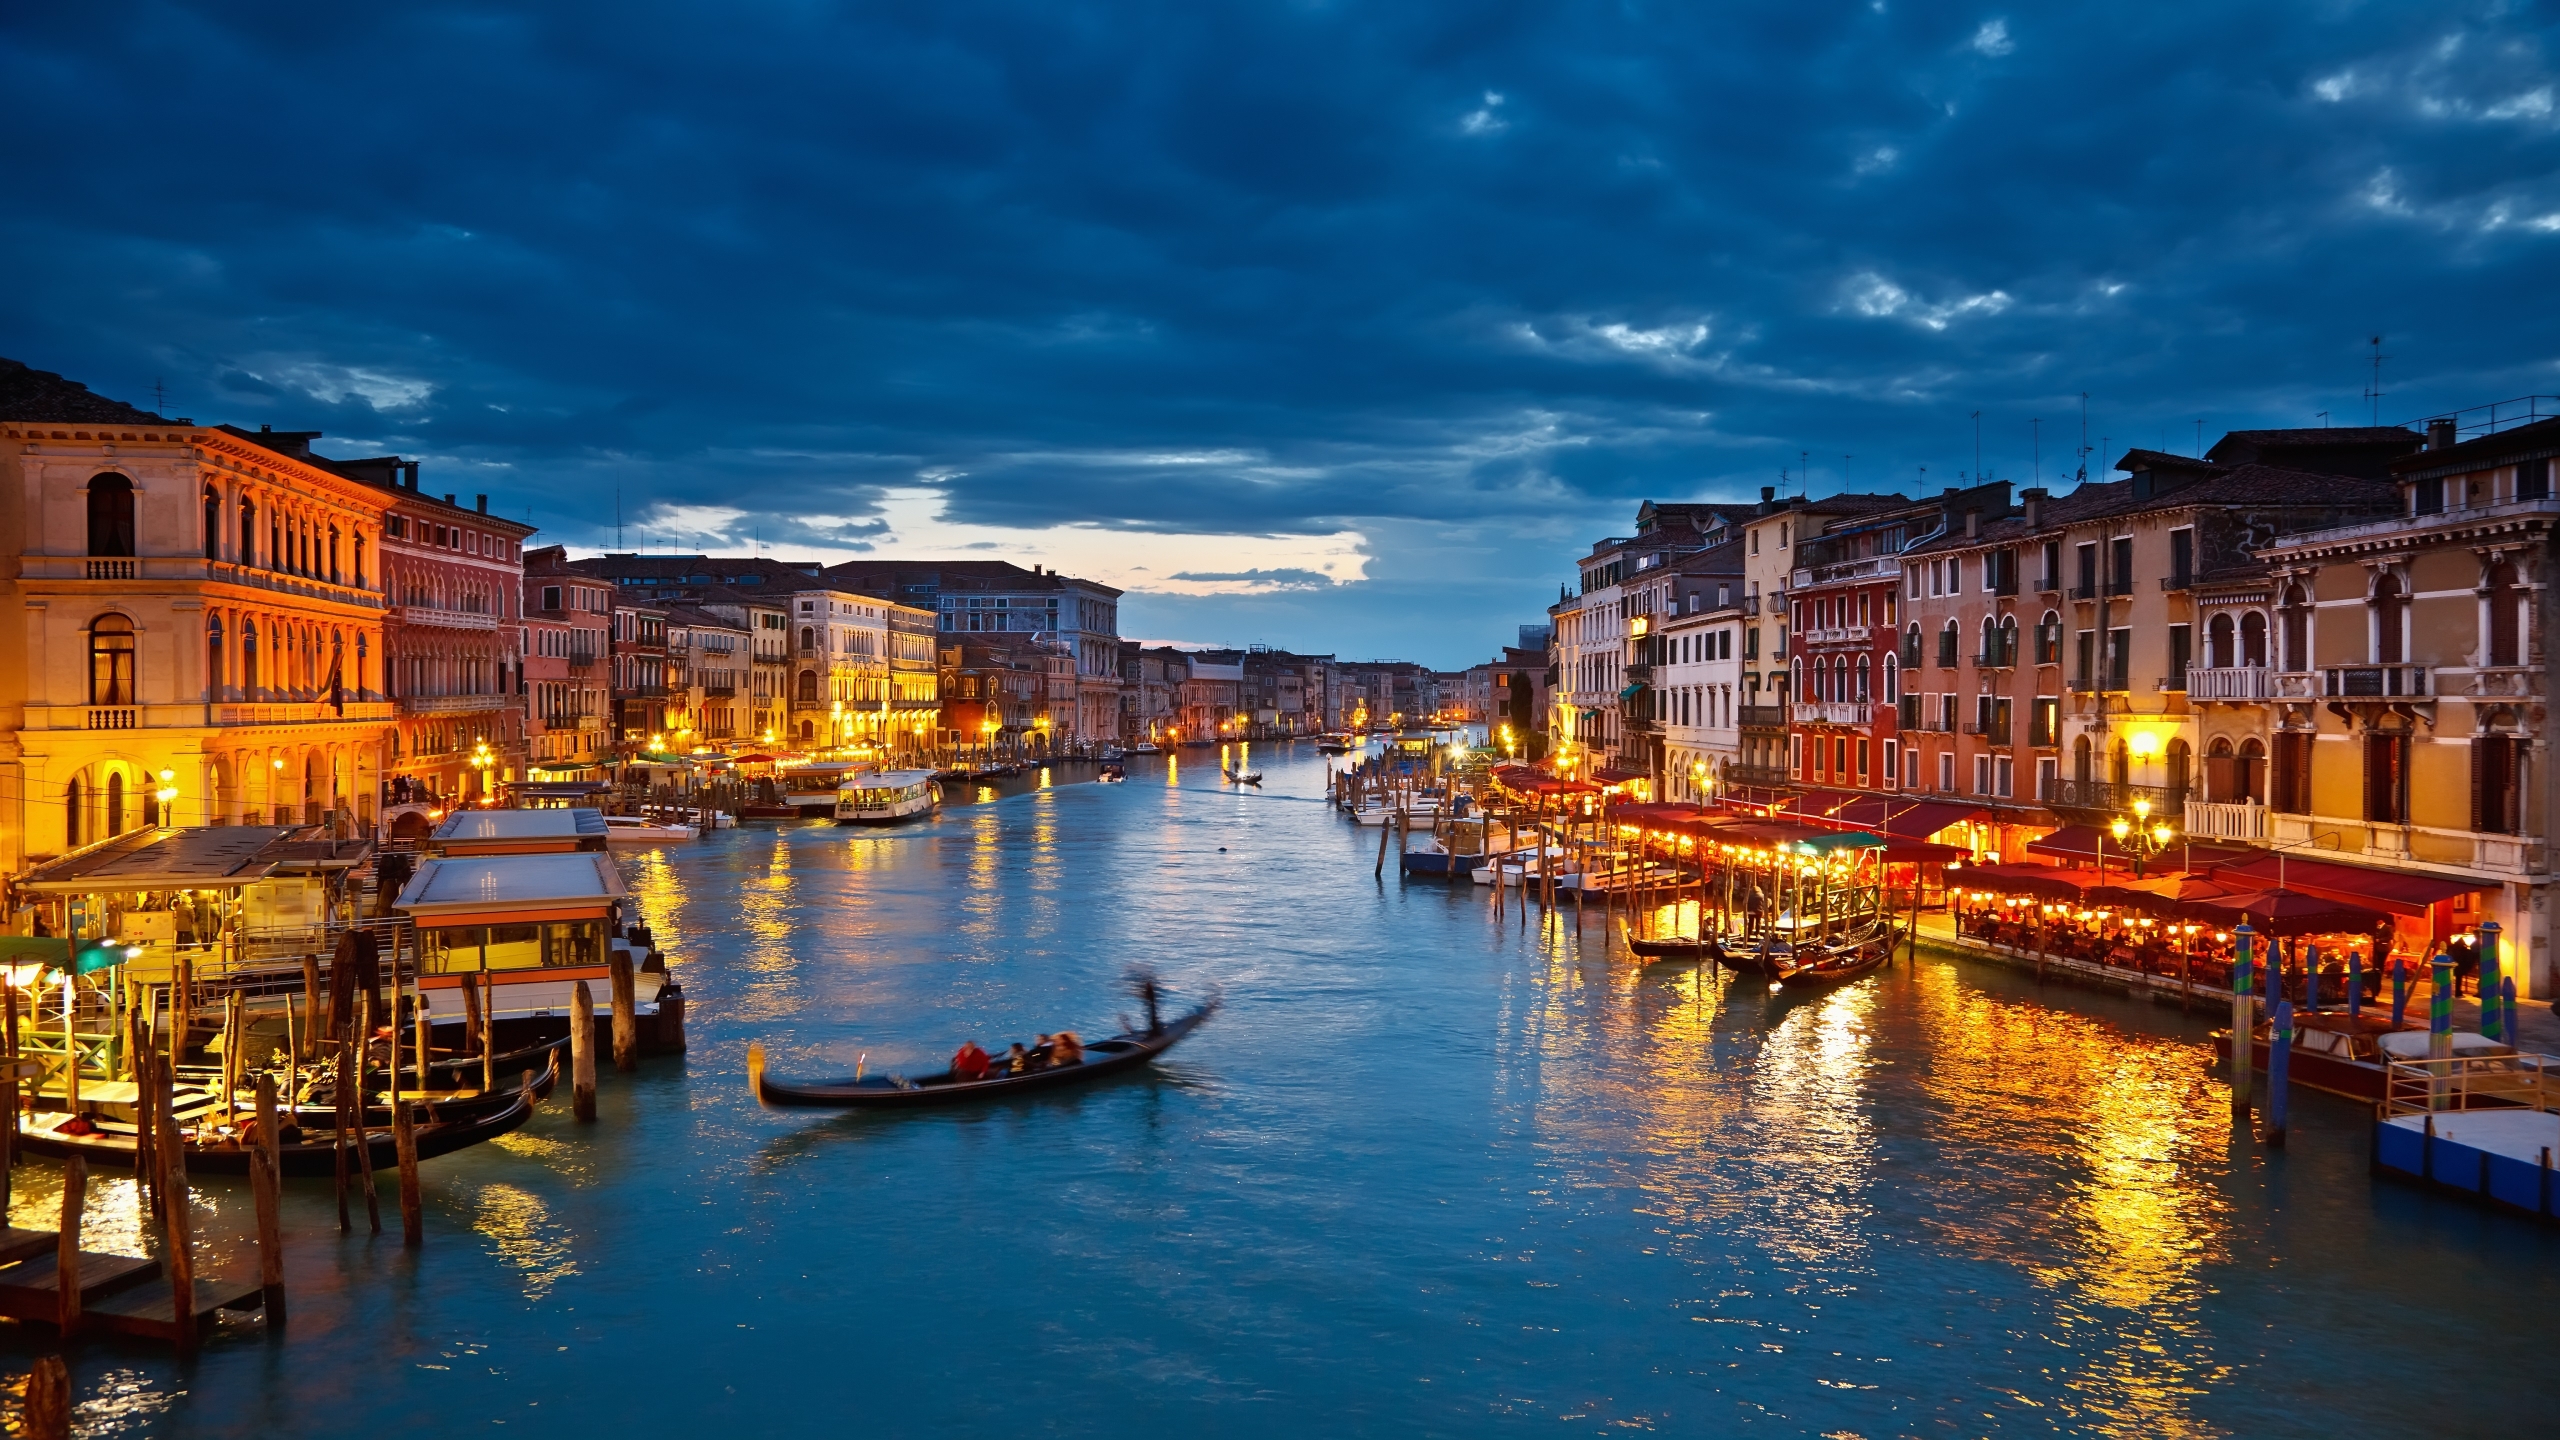 Venice Italy for 2560 x 1440 HDTV resolution